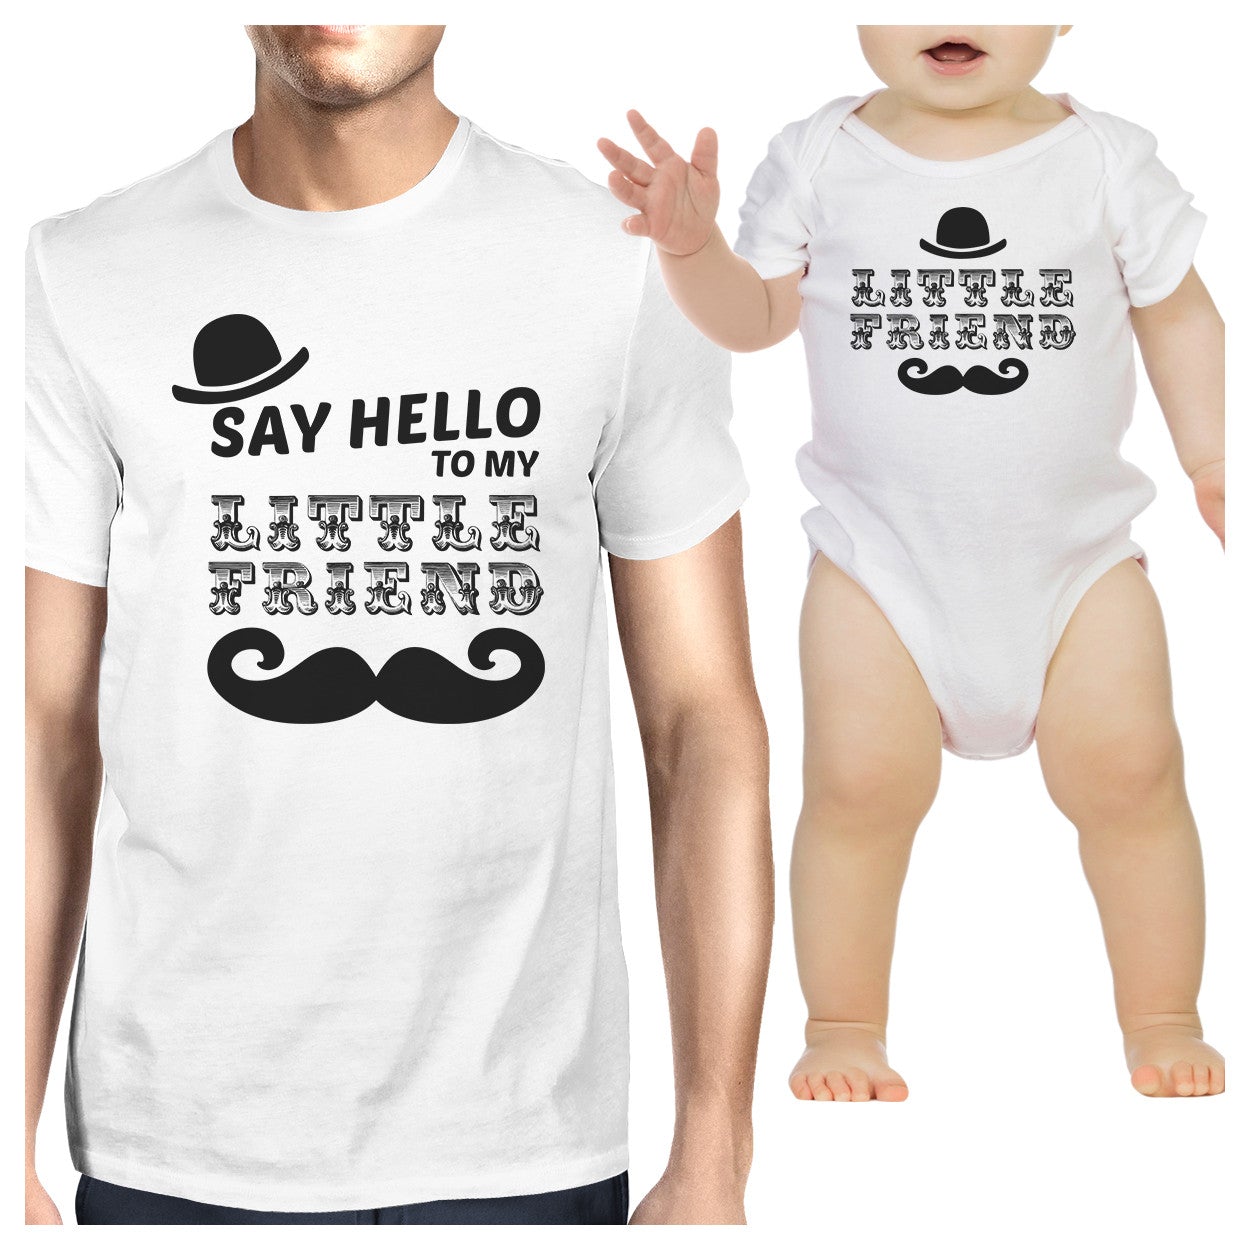 Say Hello To My Little Friend Mustache Dad and Baby Matching White Shirts